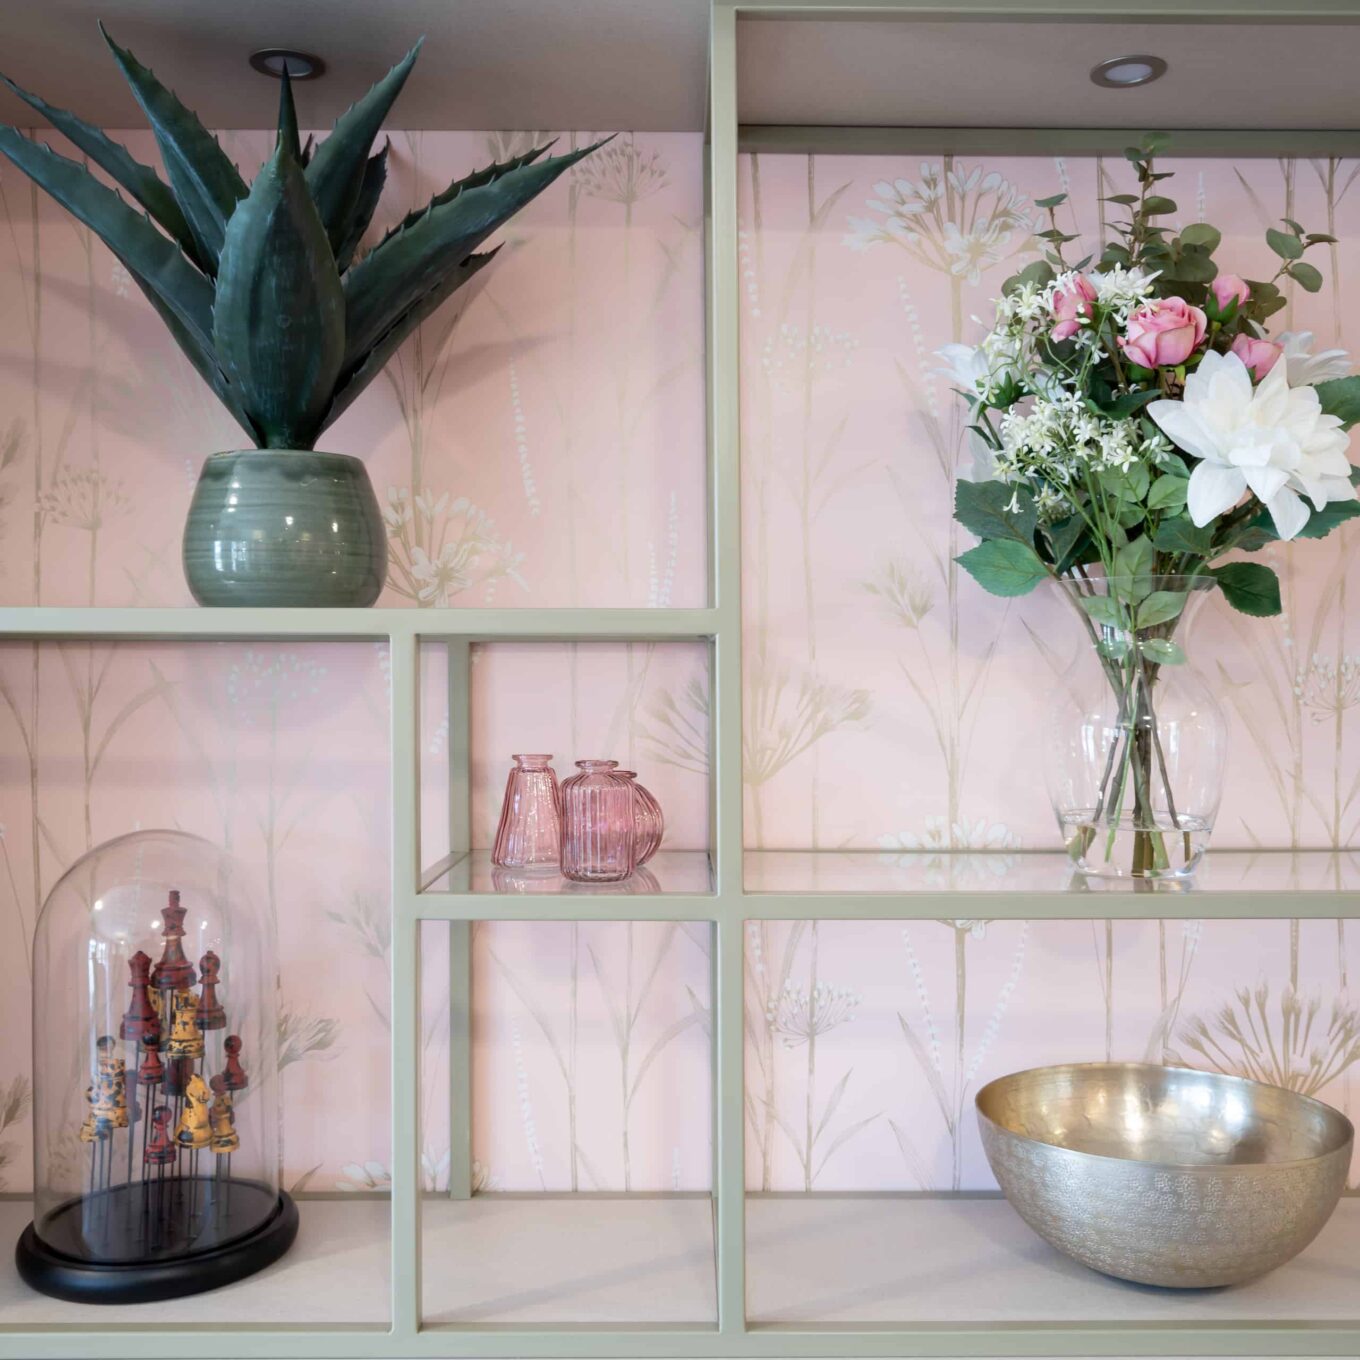 Ornaments and flowers on shelves in care home